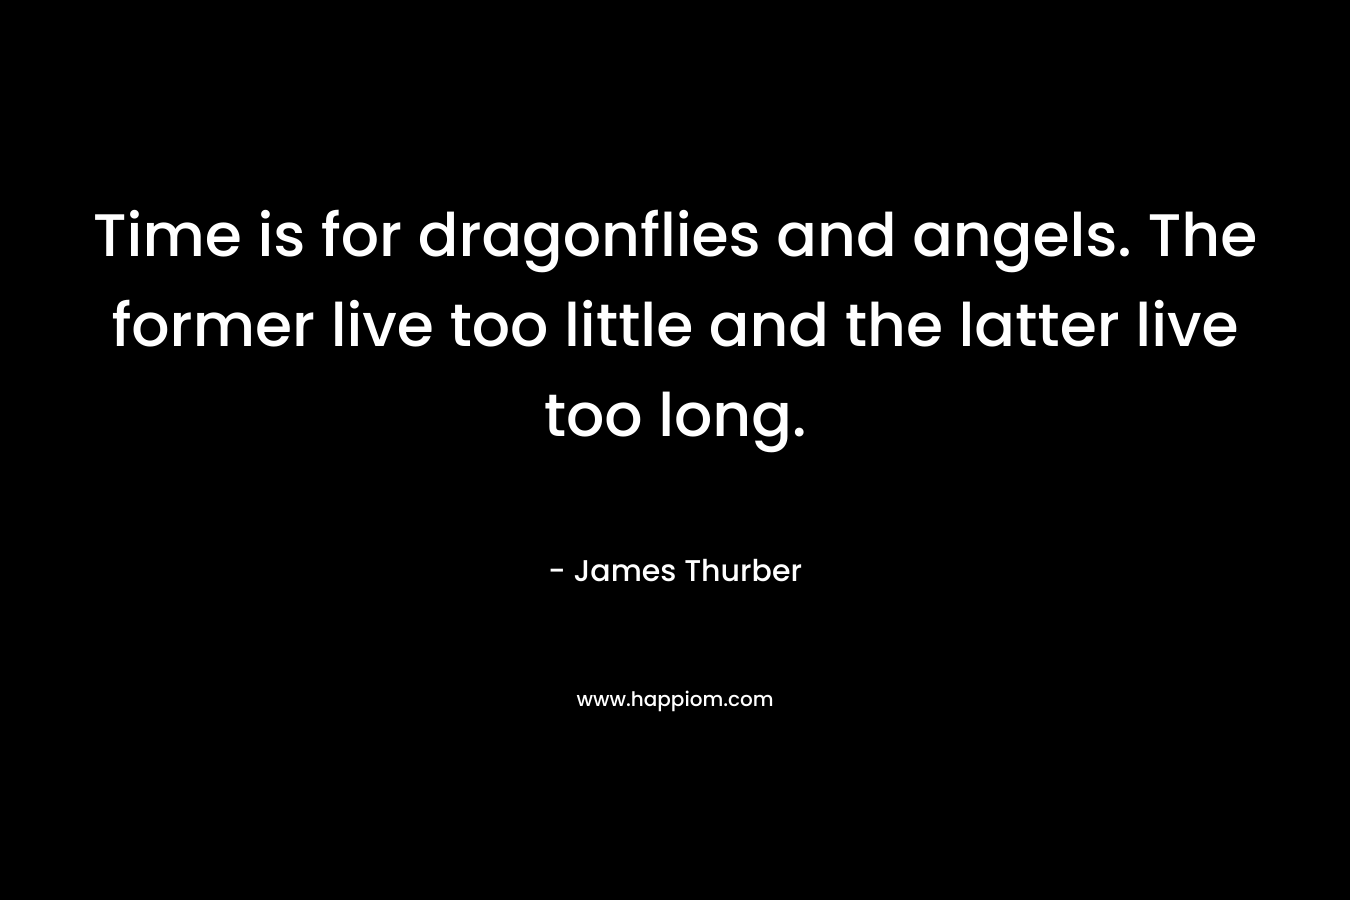 Time is for dragonflies and angels. The former live too little and the latter live too long.